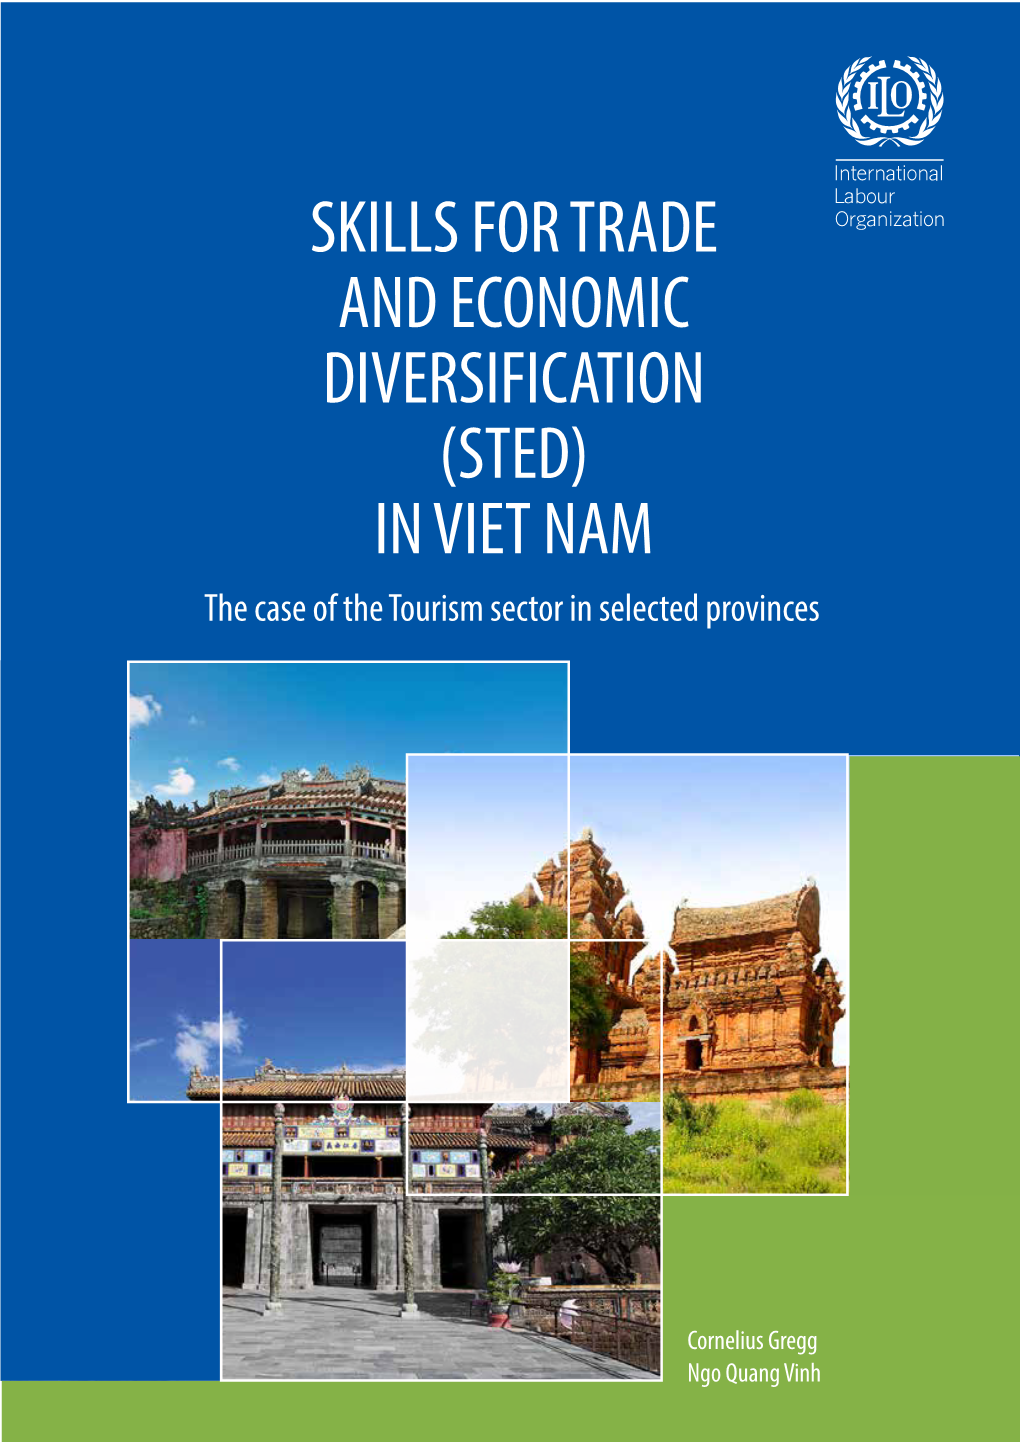 In Viet Nam: the Case of the Tourism Sector